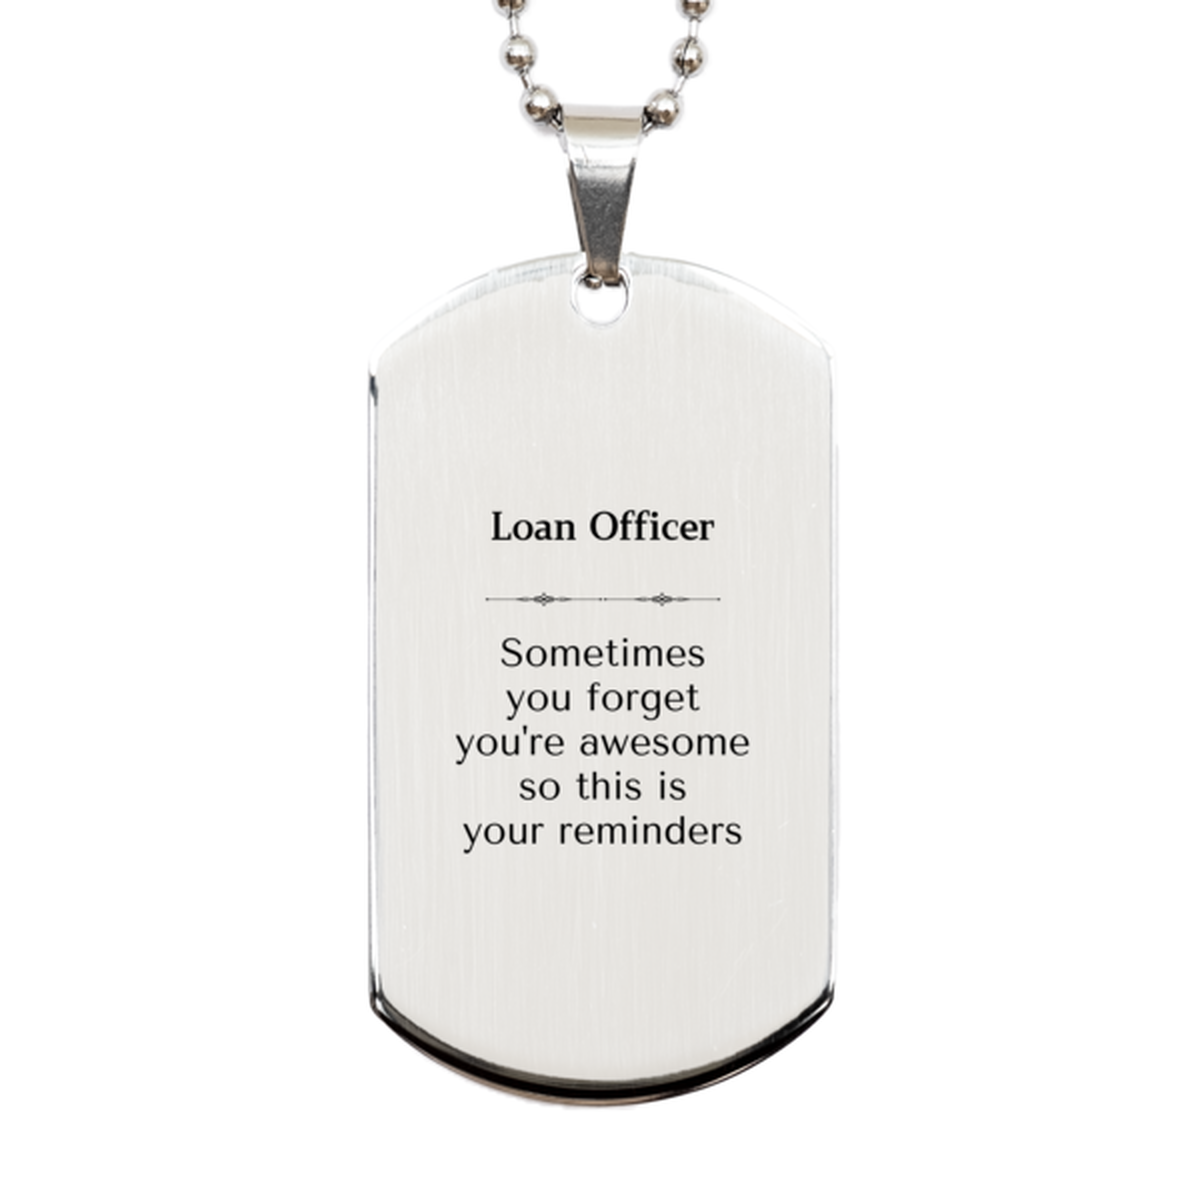 Sentimental Loan Officer Silver Dog Tag, Loan Officer Sometimes you forget you're awesome so this is your reminders, Graduation Christmas Birthday Gifts for Loan Officer, Men, Women, Coworkers